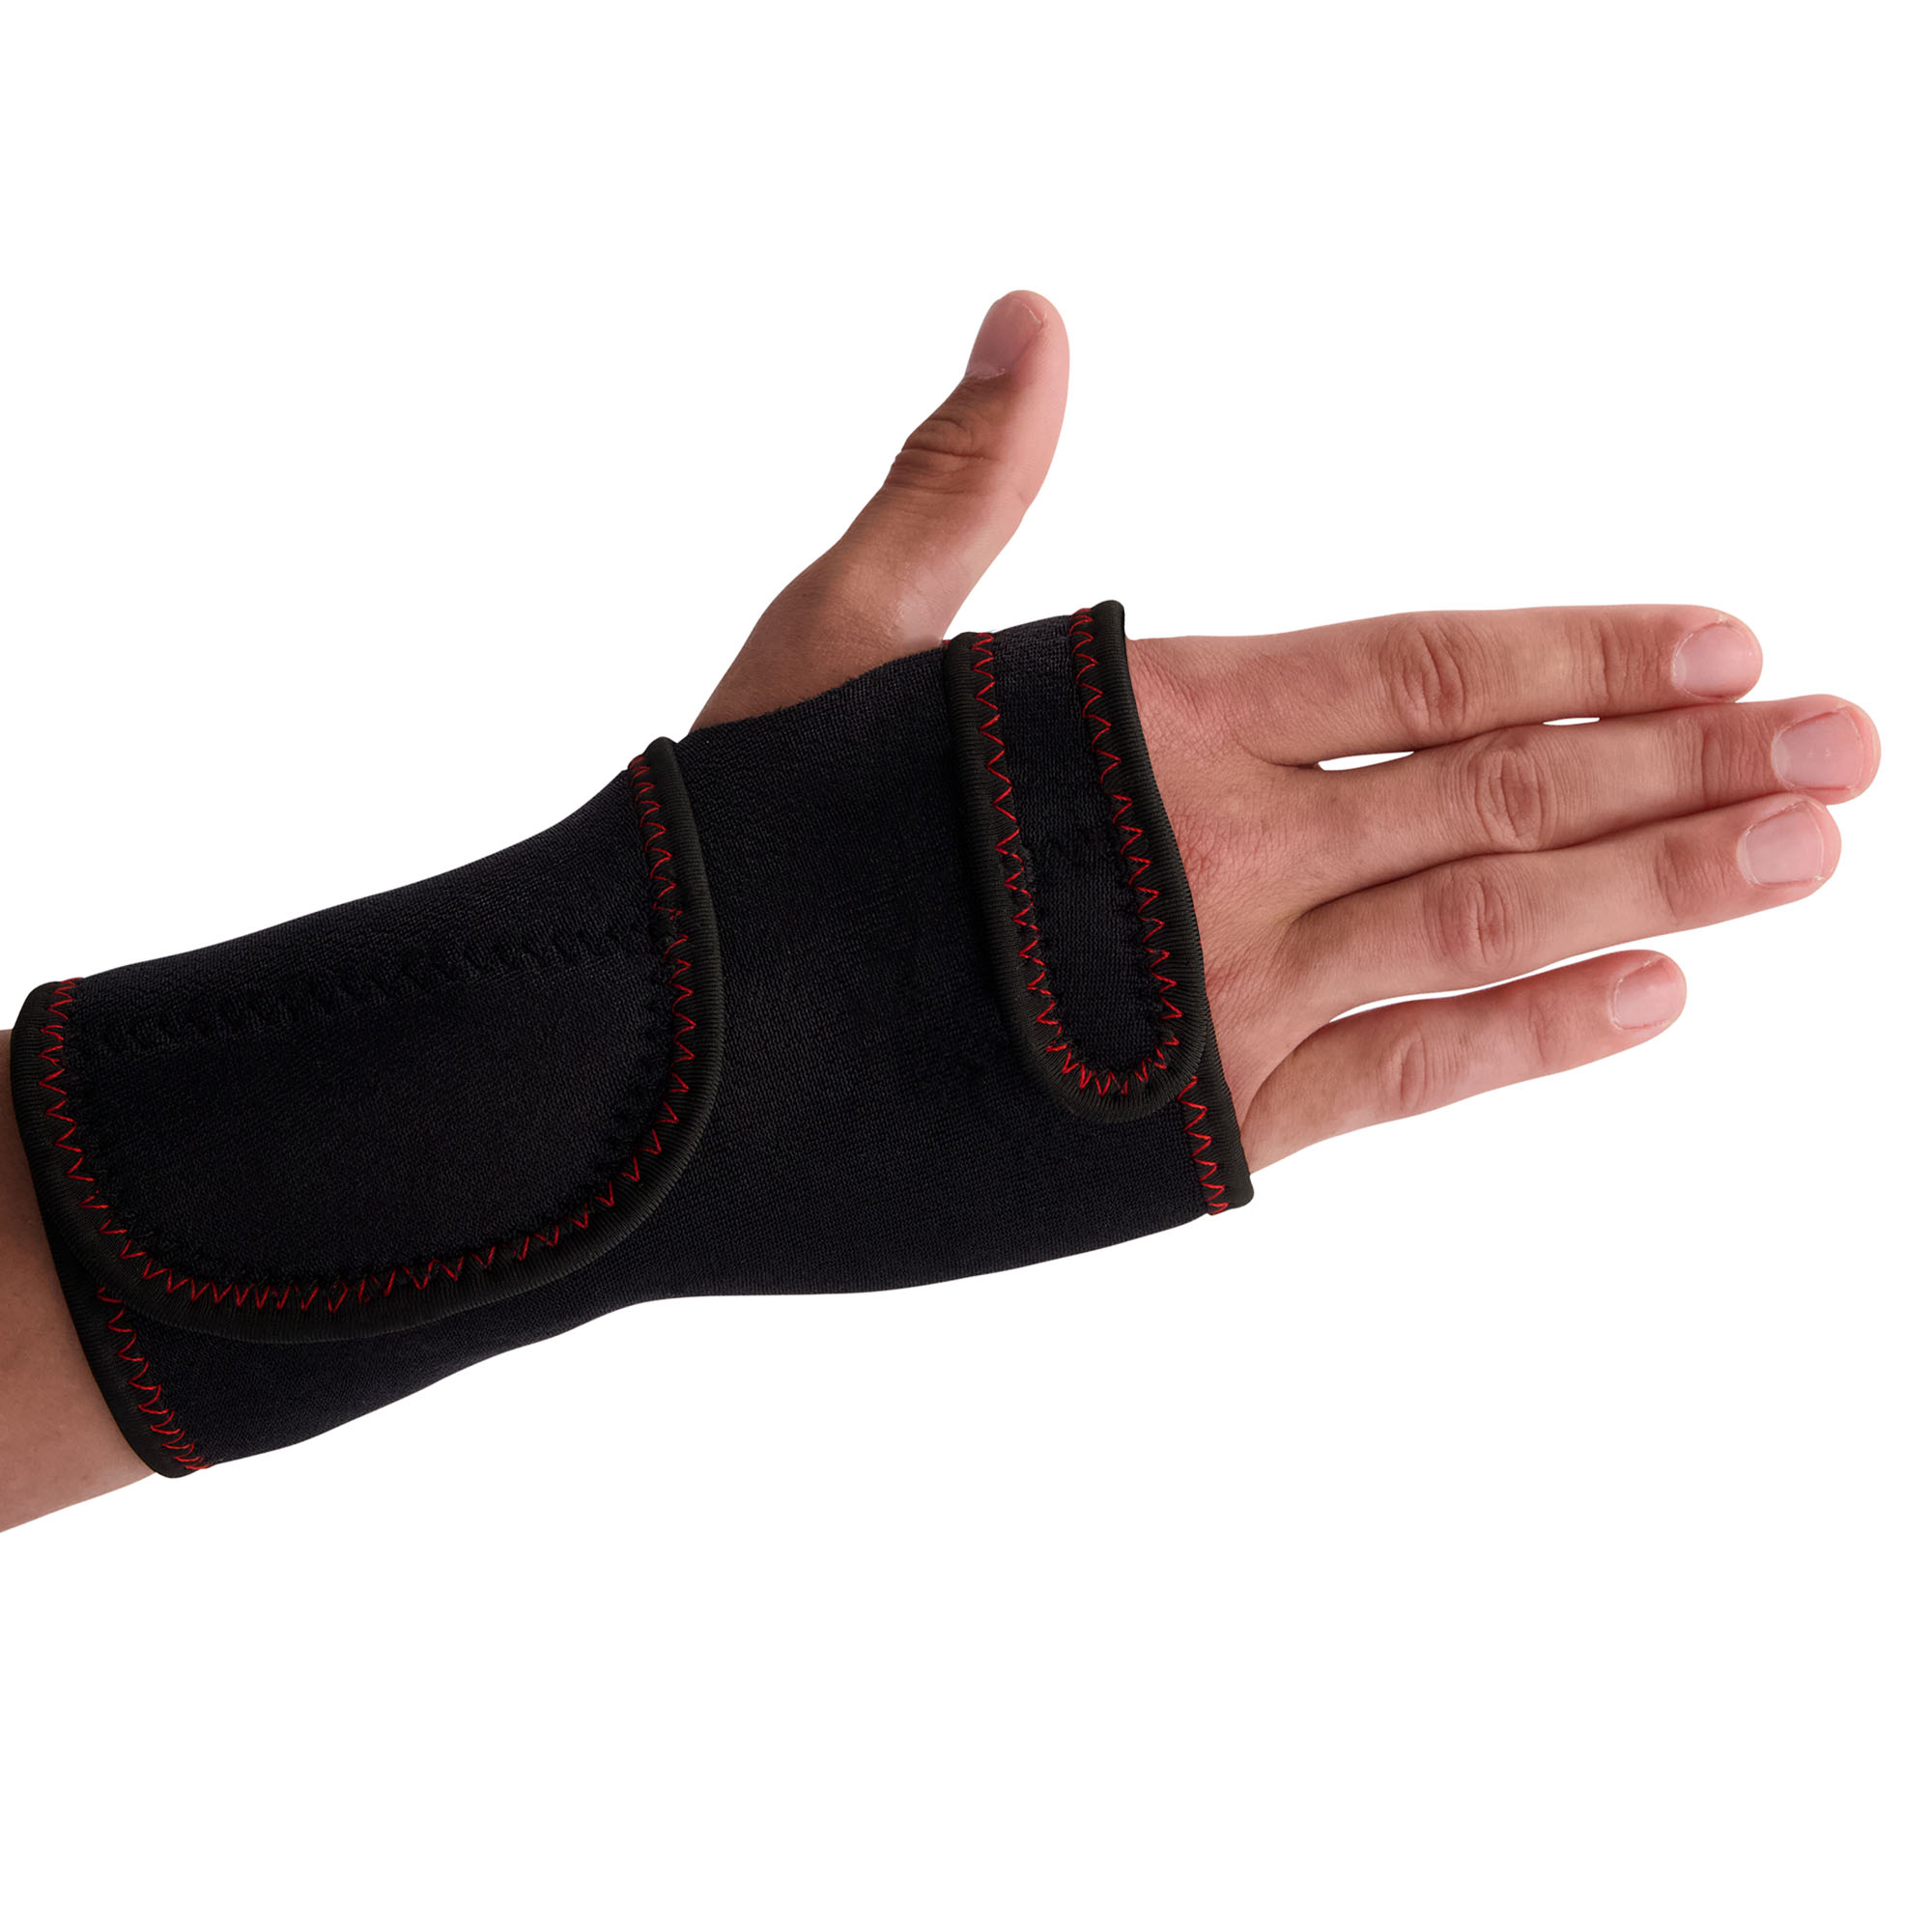 gladiator sports carpal tunnel syndrome wrist support